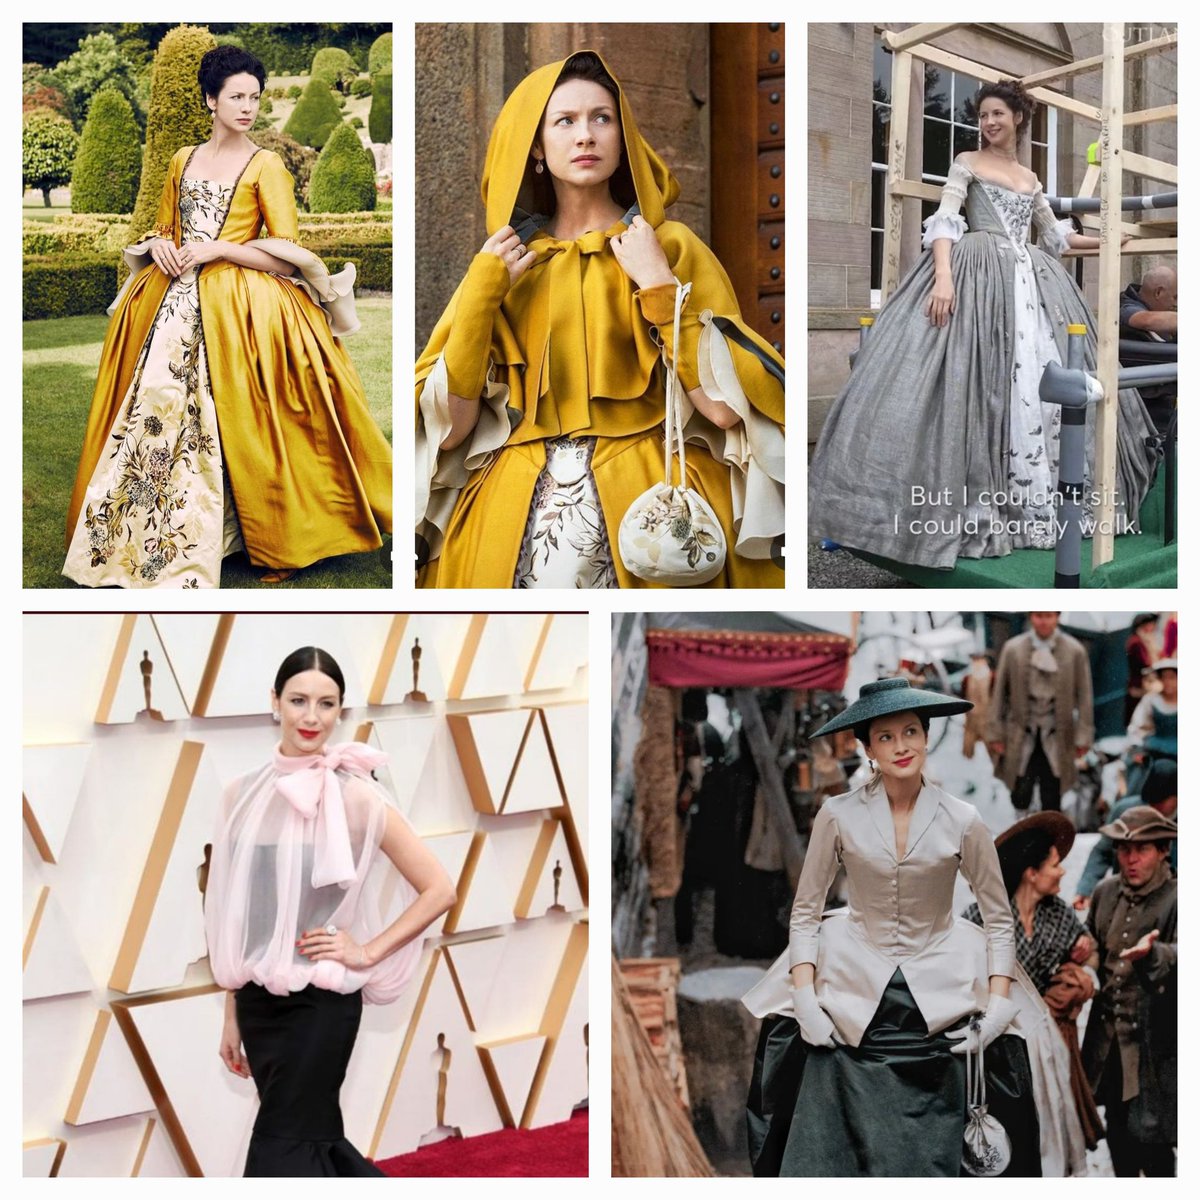 Happy Caiturday🌟🌟🌟  Stunningly Beautiful in gowns from every century🌟👑🌟
@caitrionambalfe